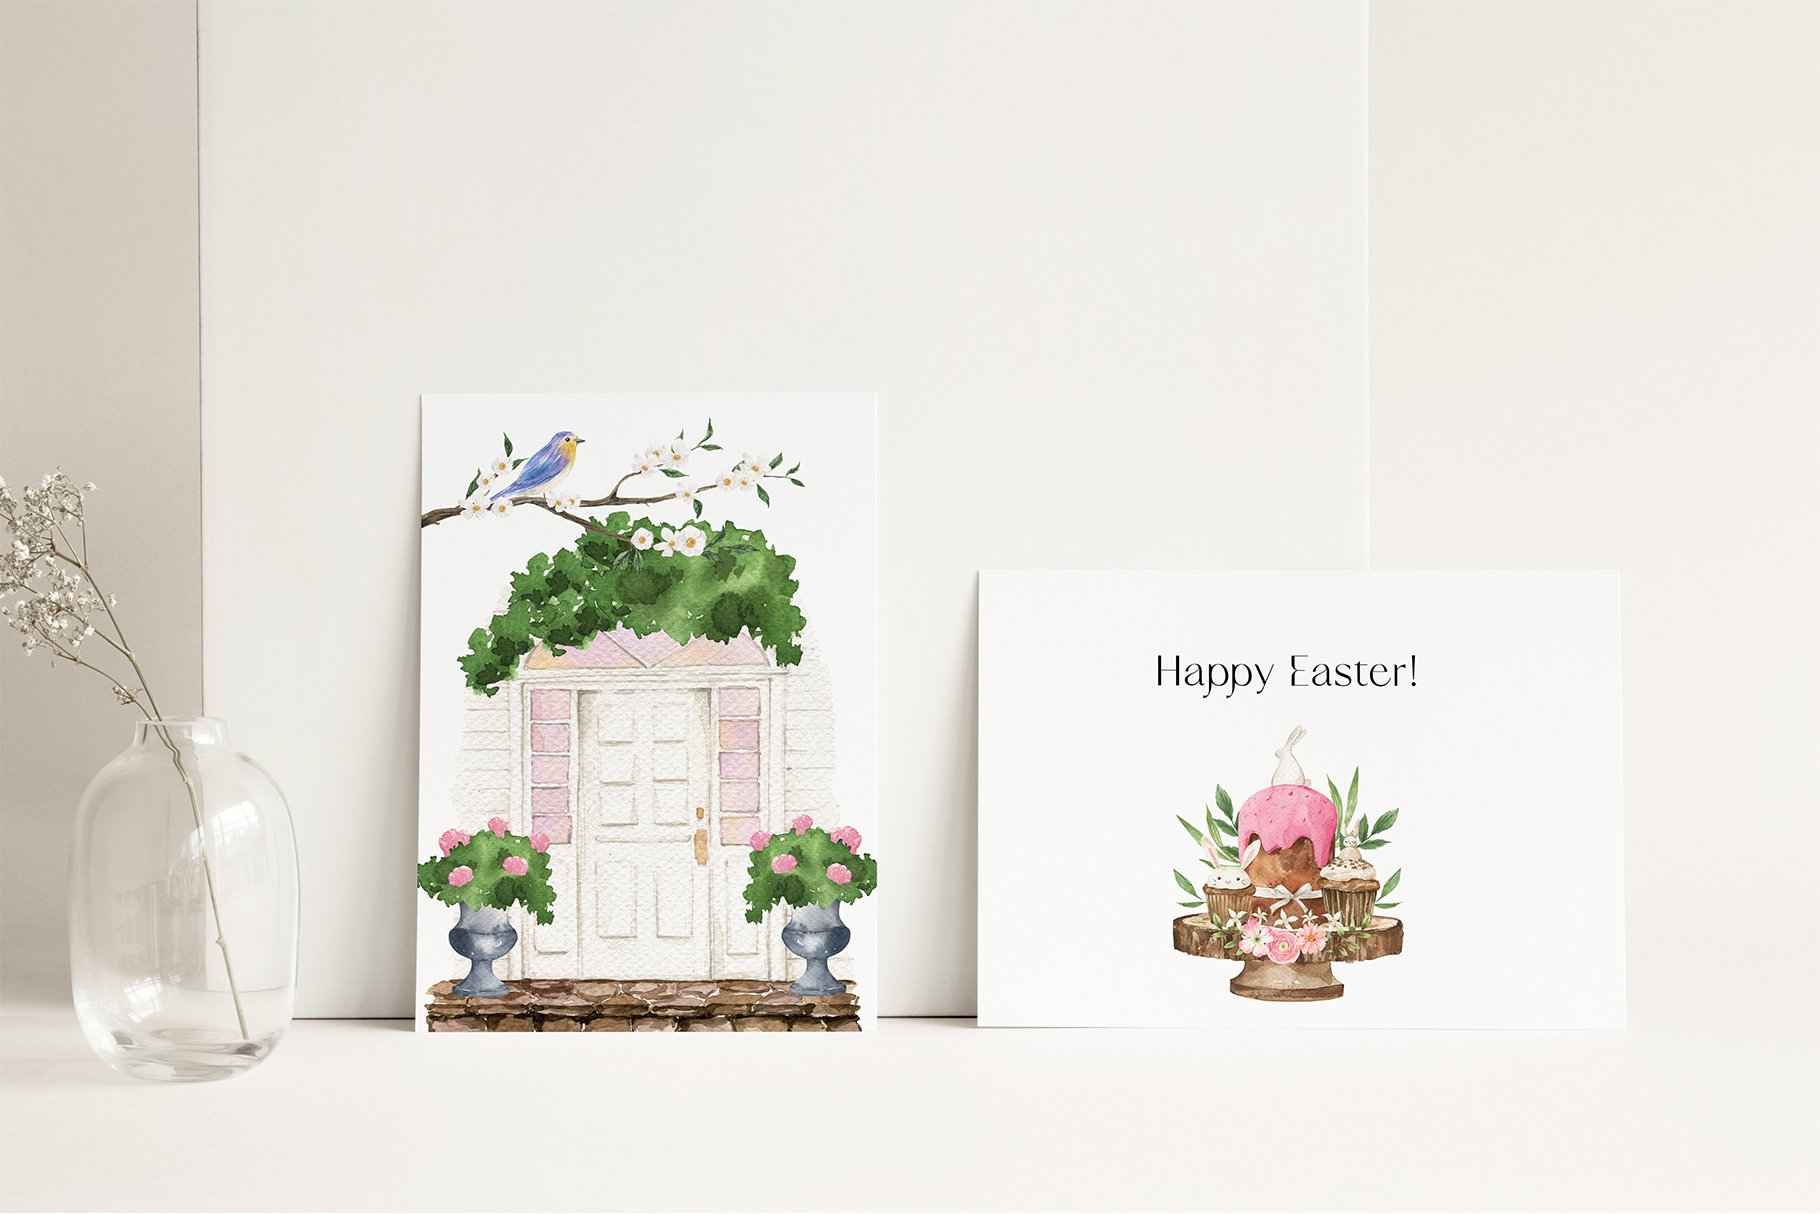 Use this Easter collection to decorate your festive table.